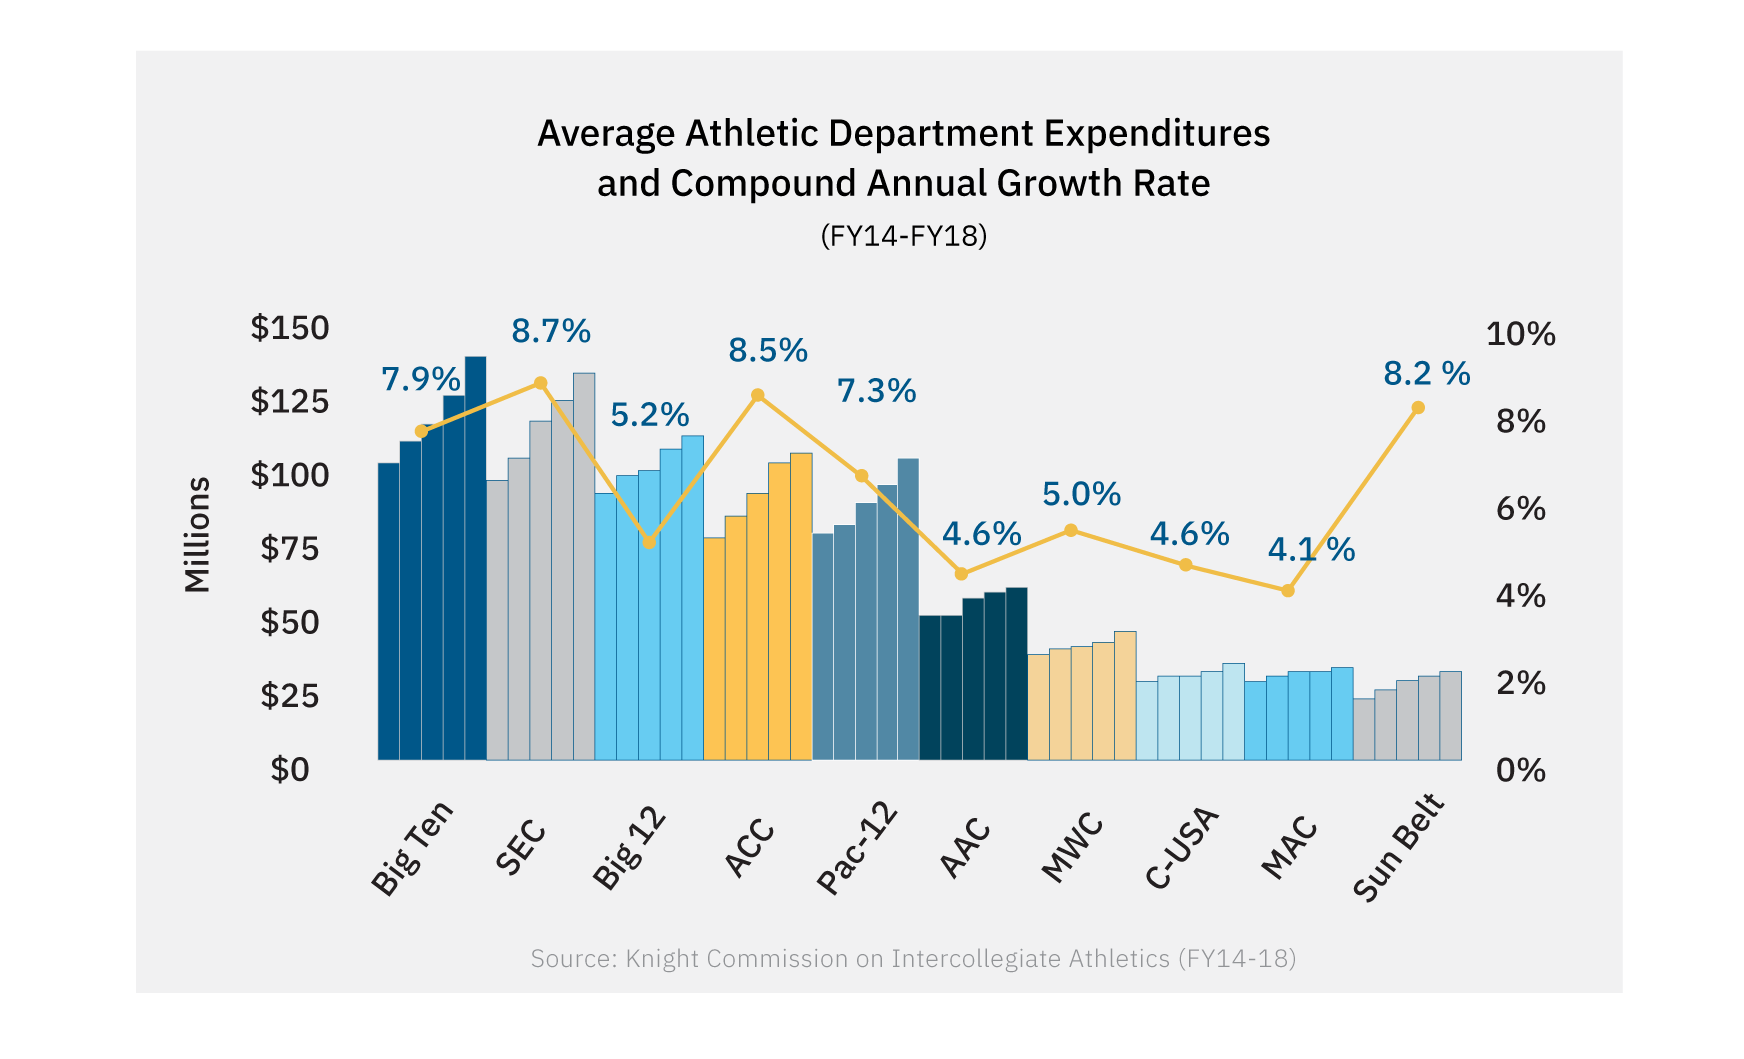 A graph of average athletic department expenditures and compound annual growth rate from 2014-2018